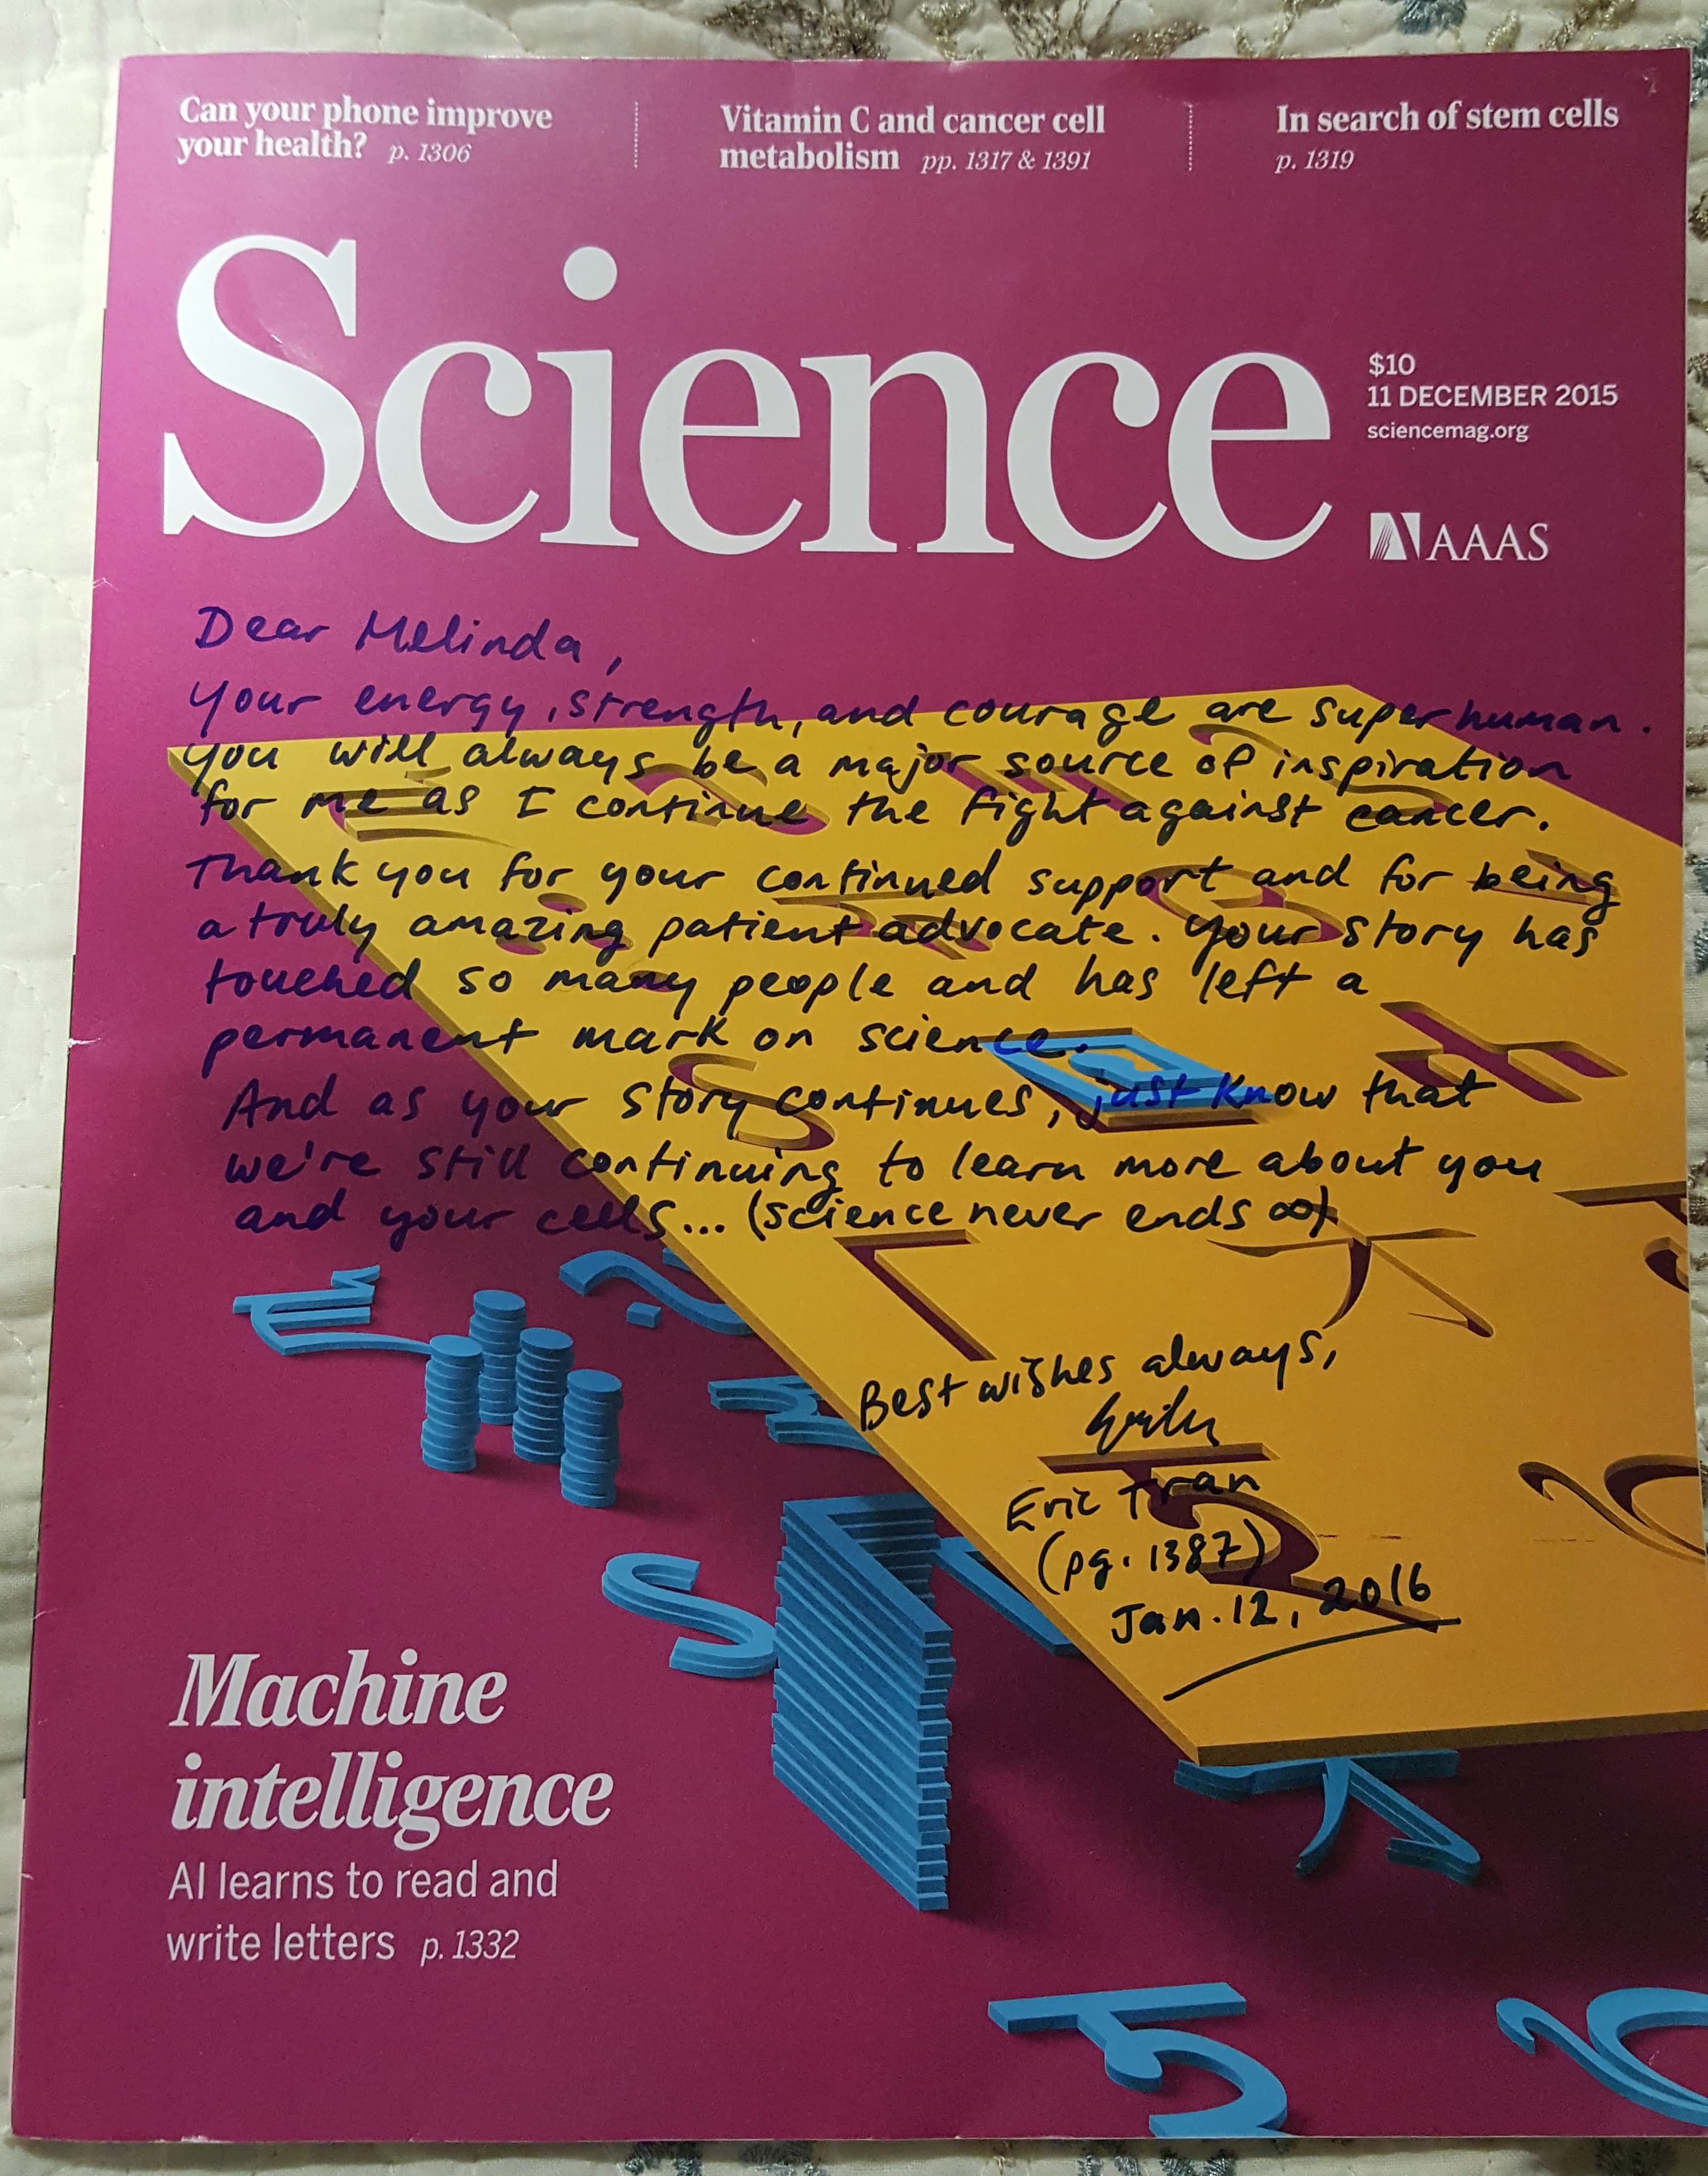 Message written by Dr Tran on the pink cover of a Science magazine